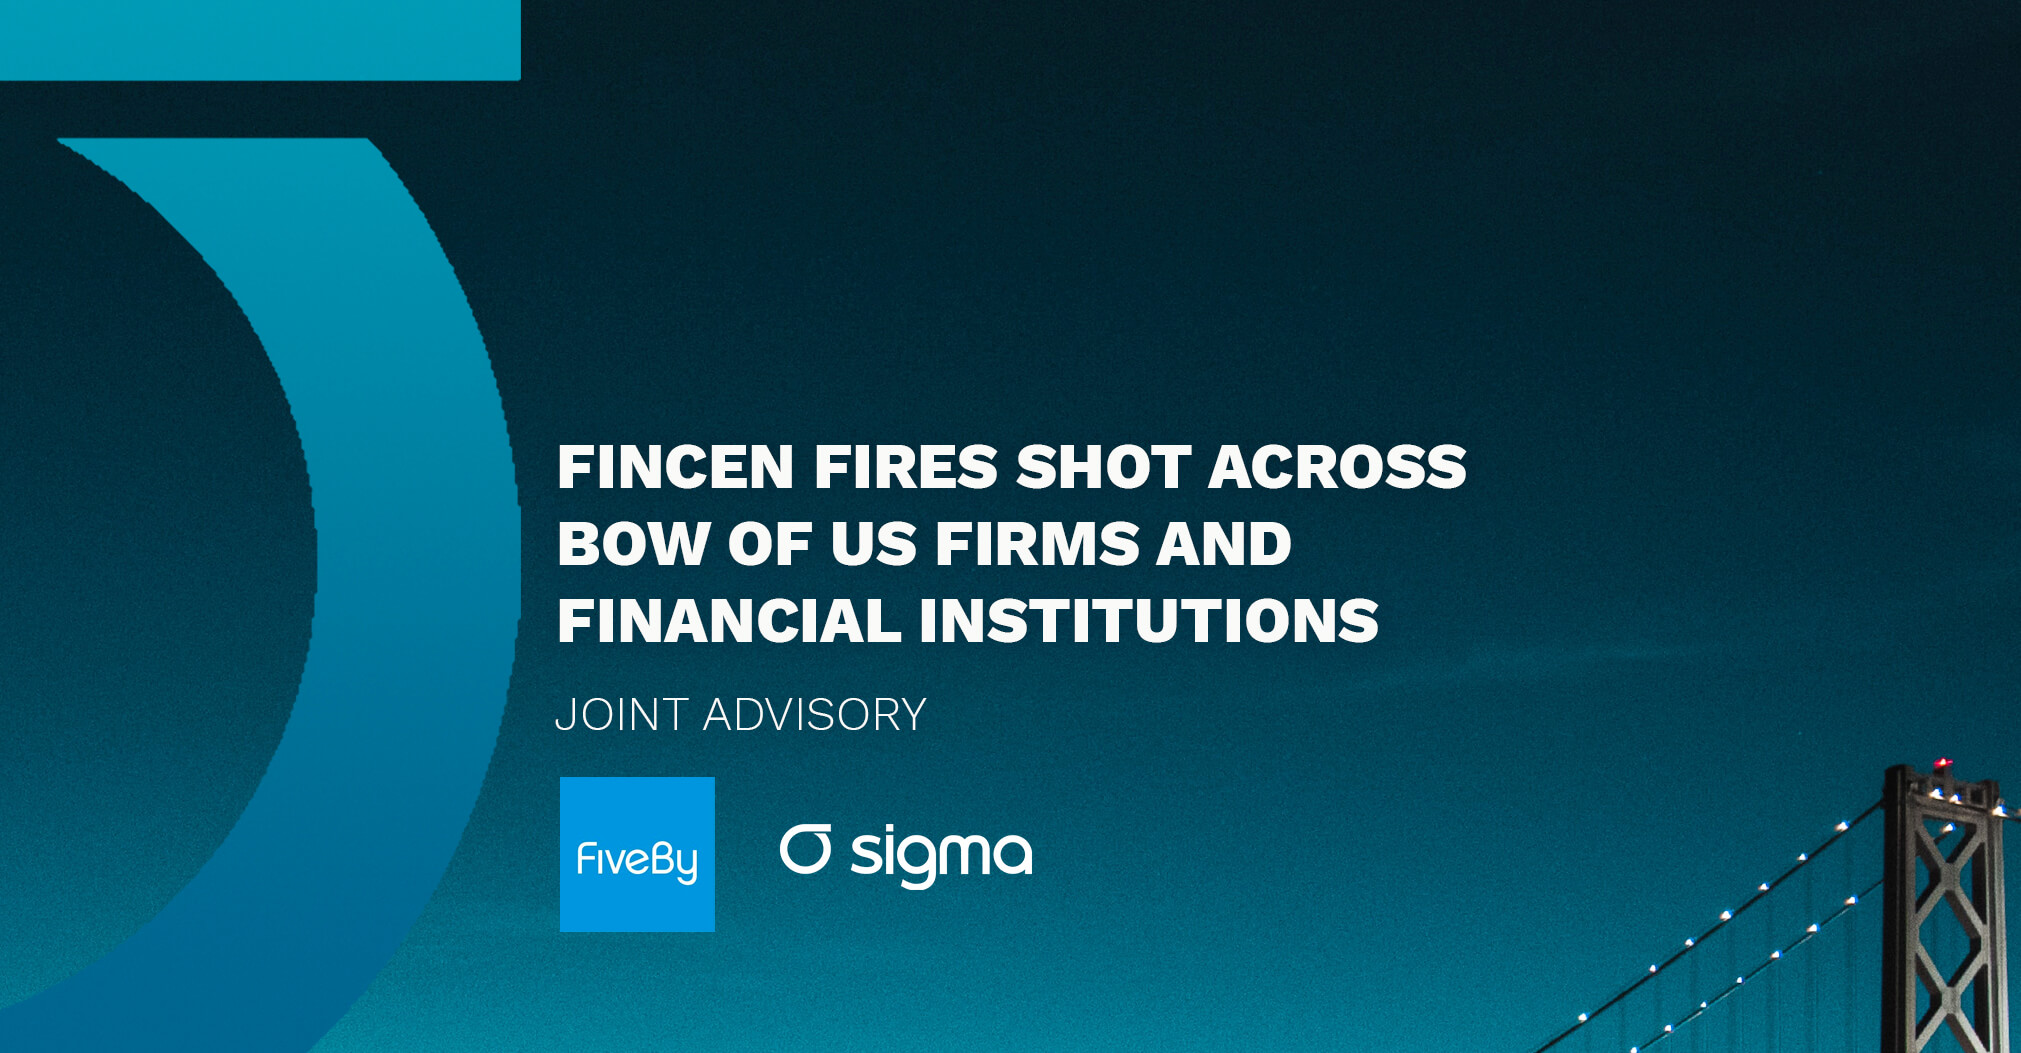 FinCEN Fires Shot Across Bow of US Firms and Financial Institutions